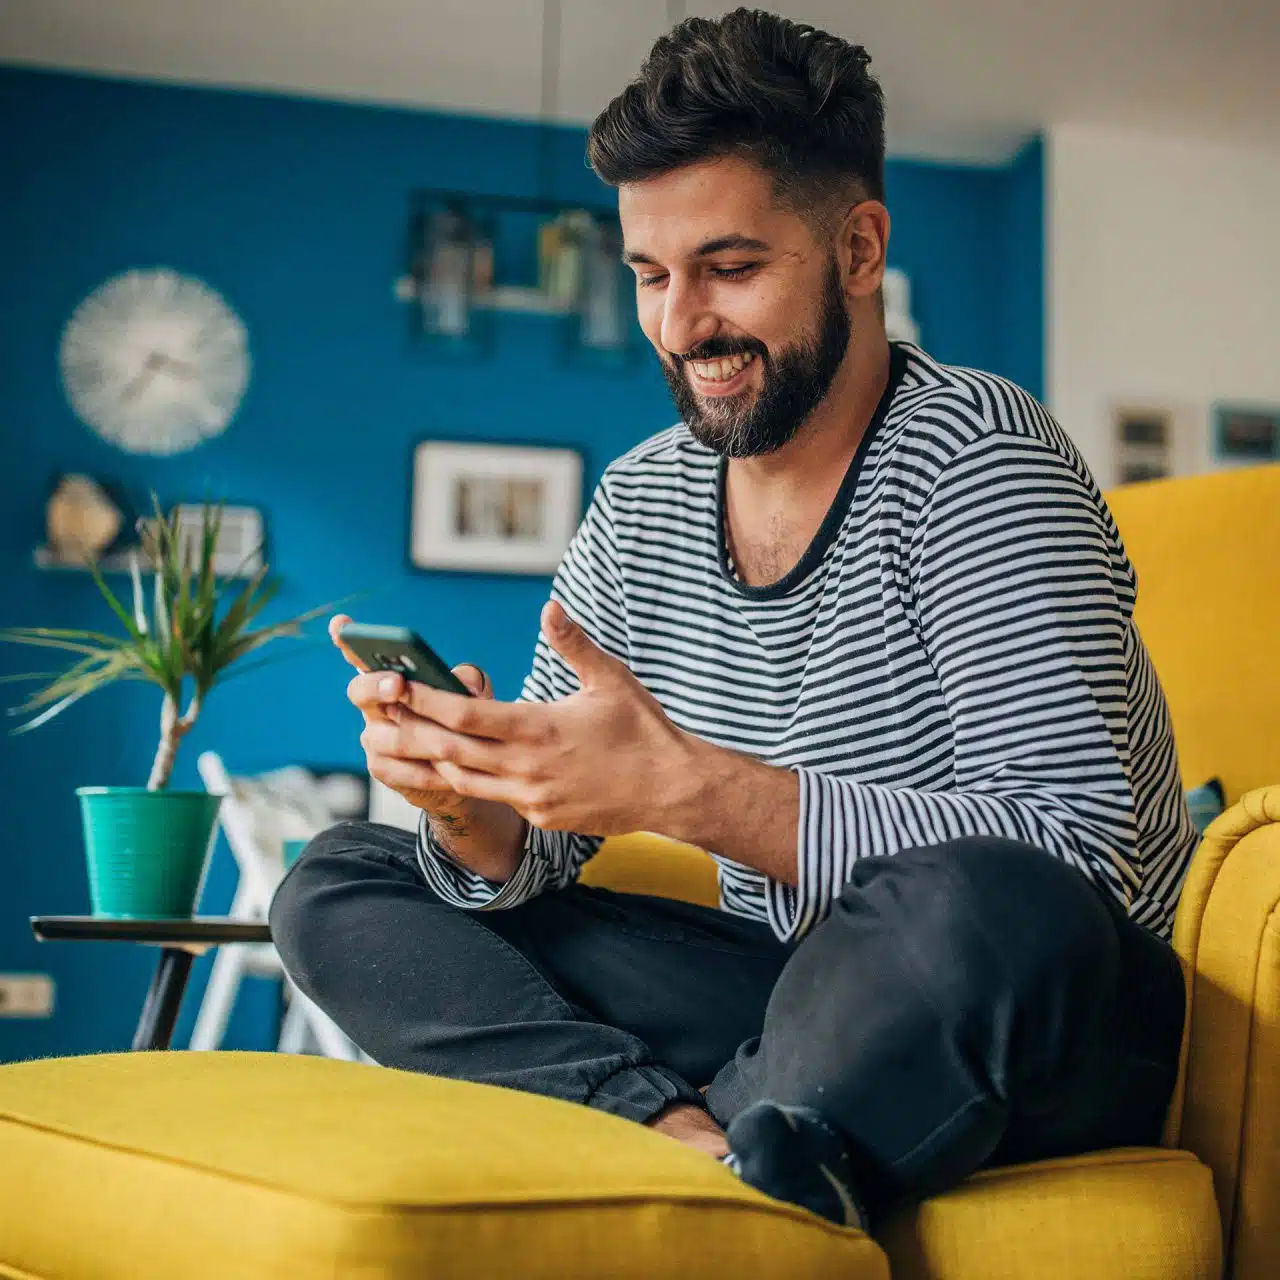 Bearded man in striped shirt sitting on a yellow chair smiling at the smartphone he holds in his hands